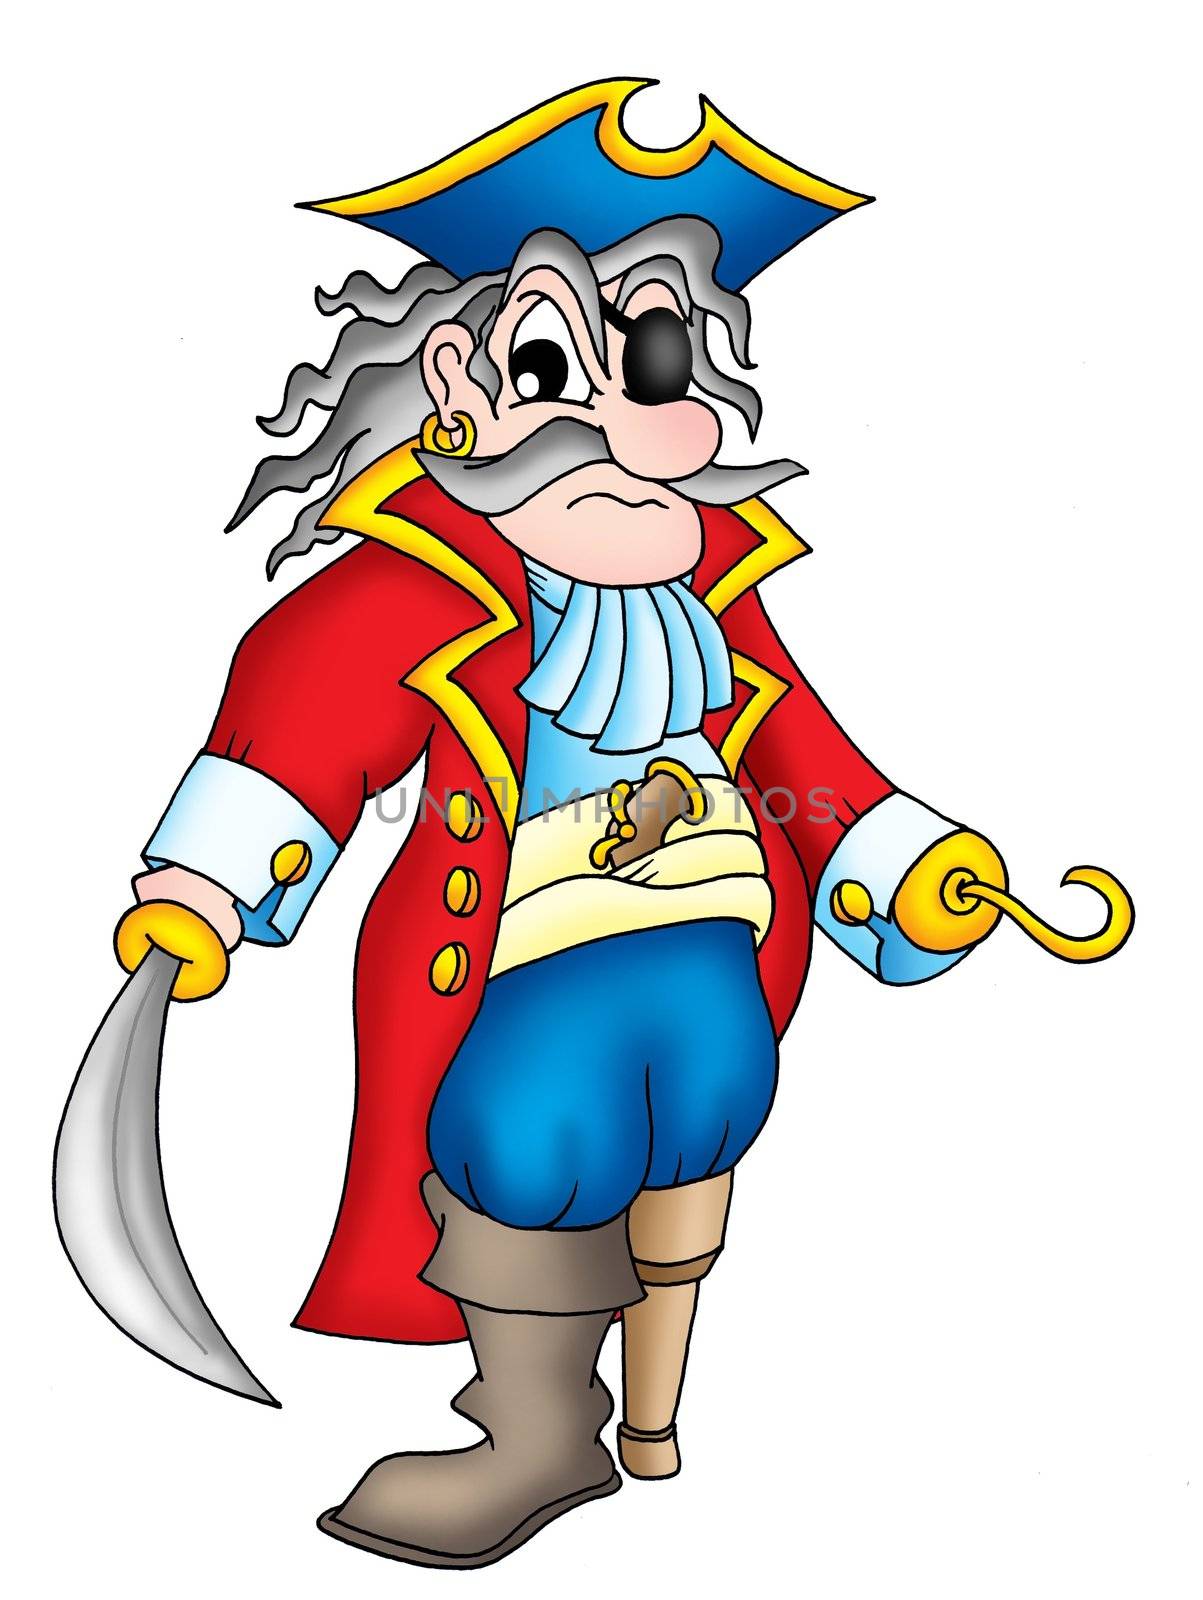 Old pirate with wooden leg - color illustration.